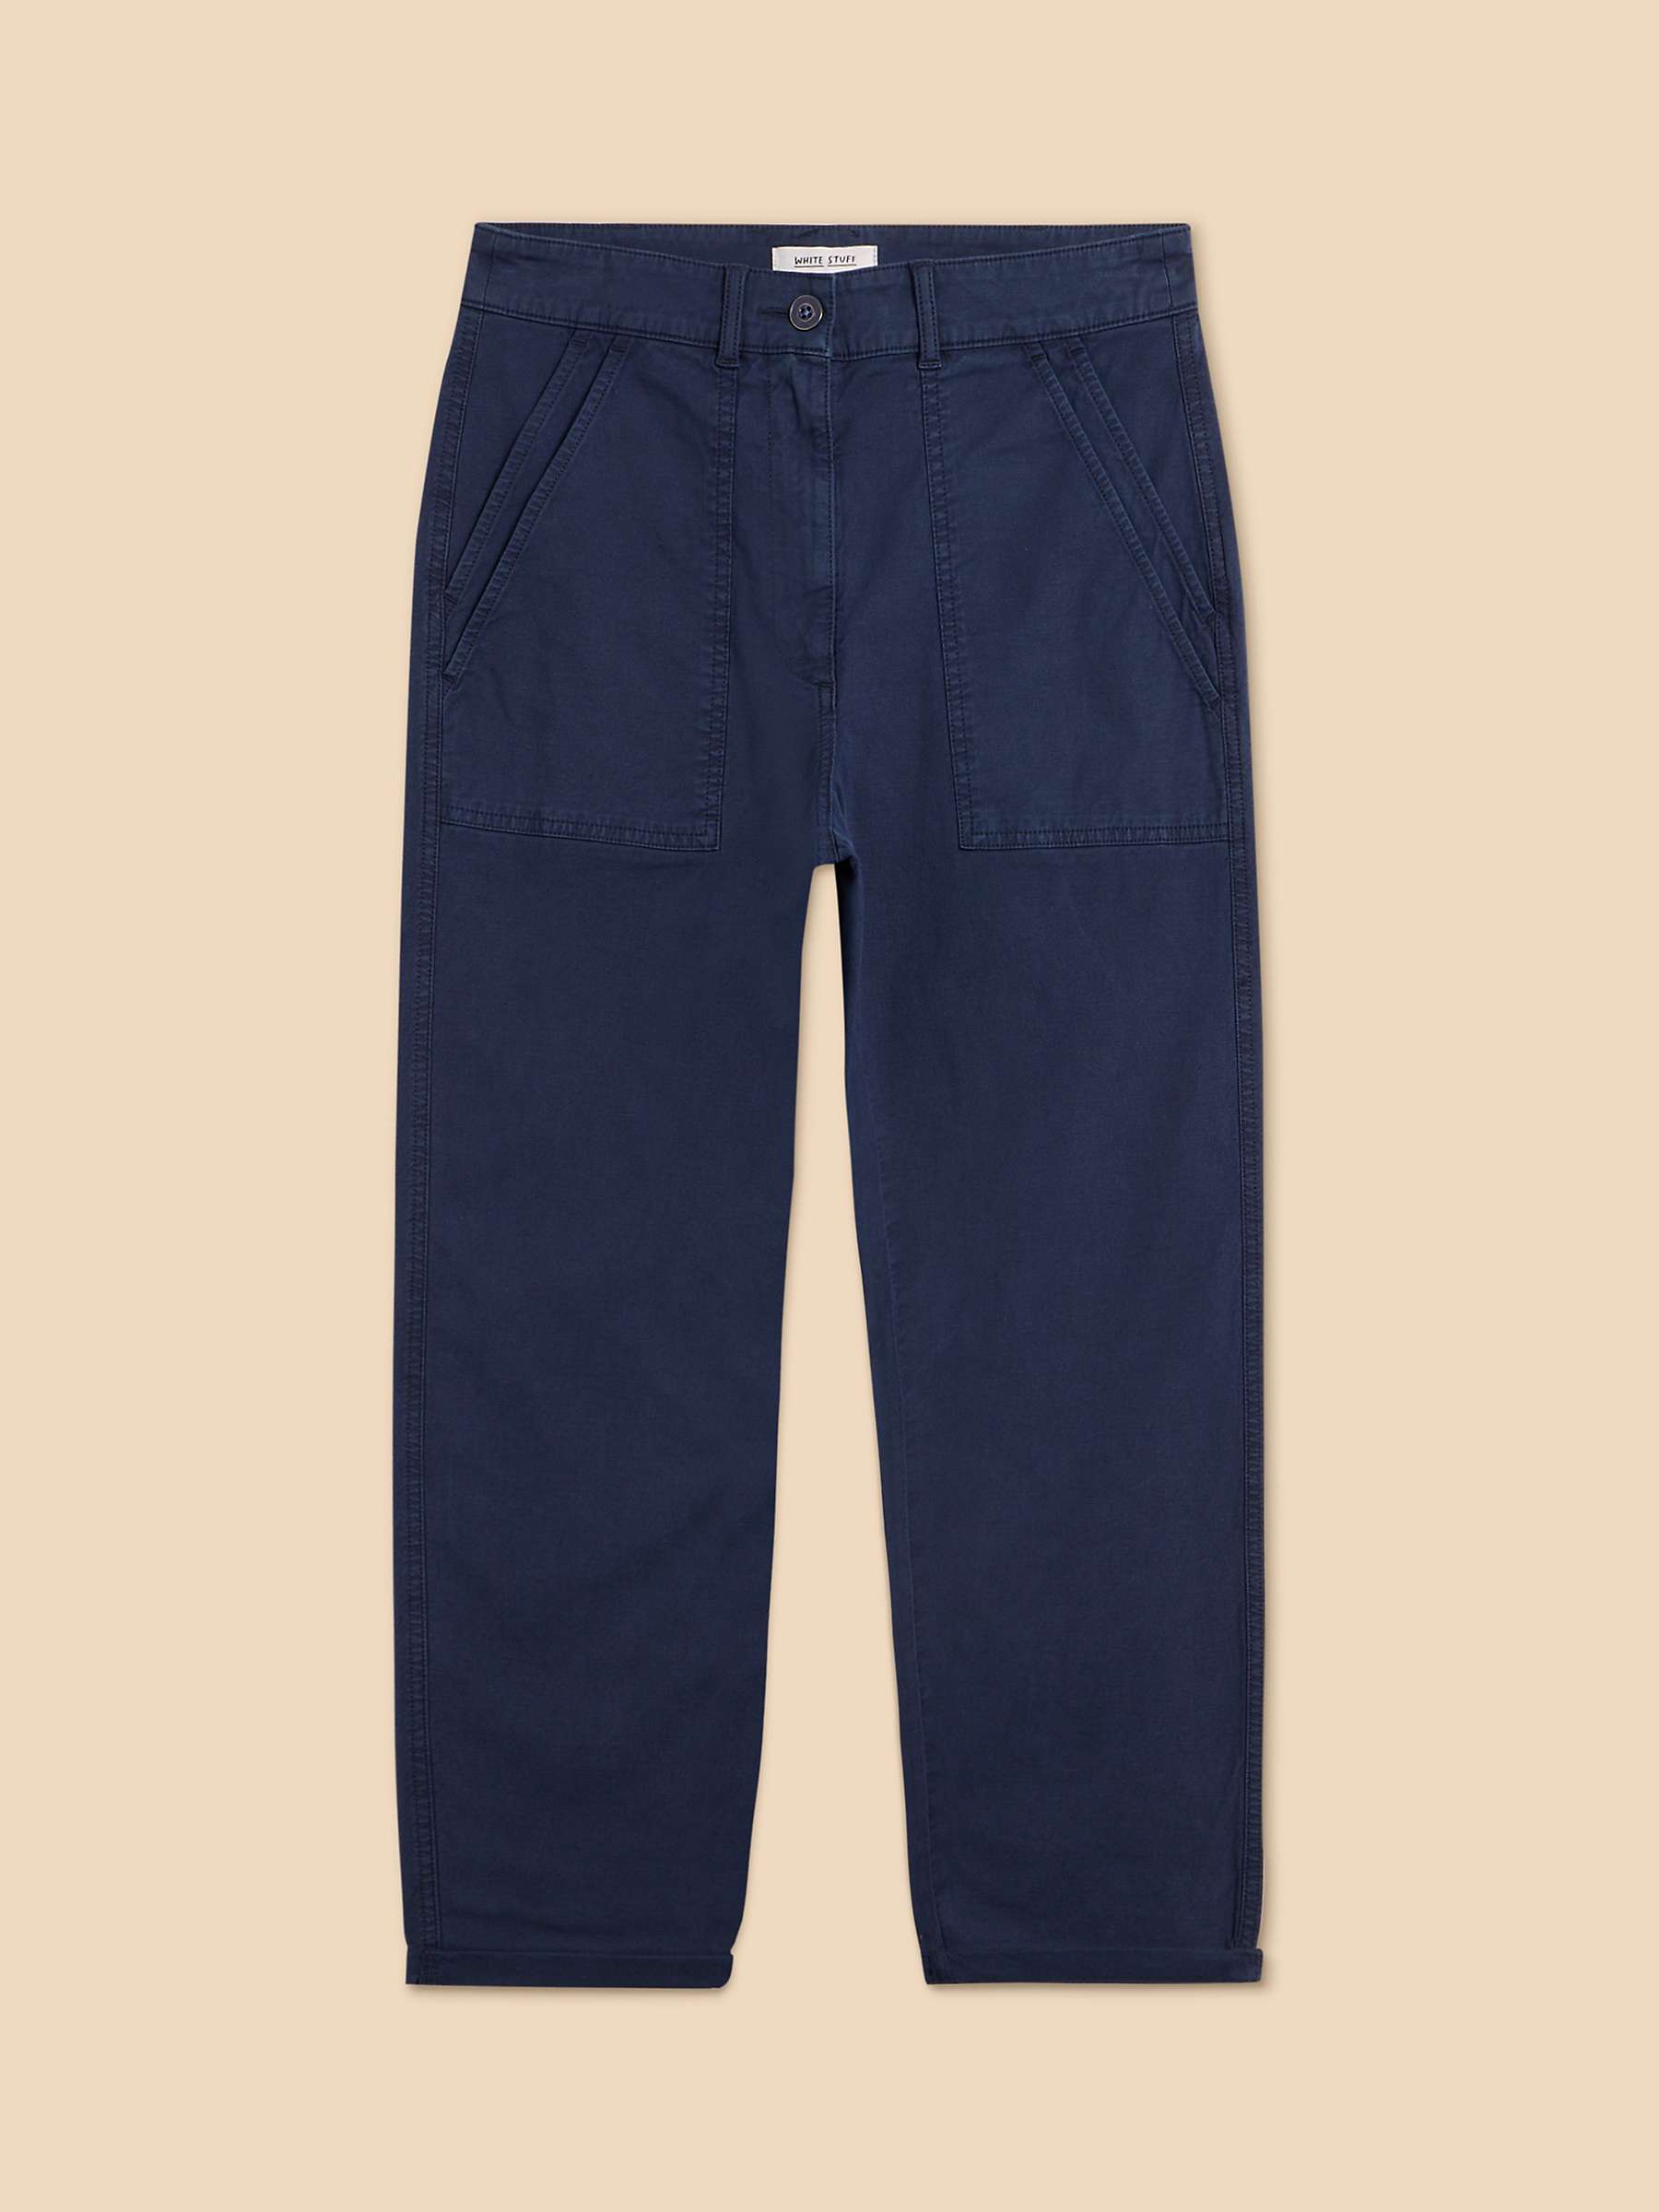 Buy White Stuff Linen Blend Twister Chino Trousers Online at johnlewis.com